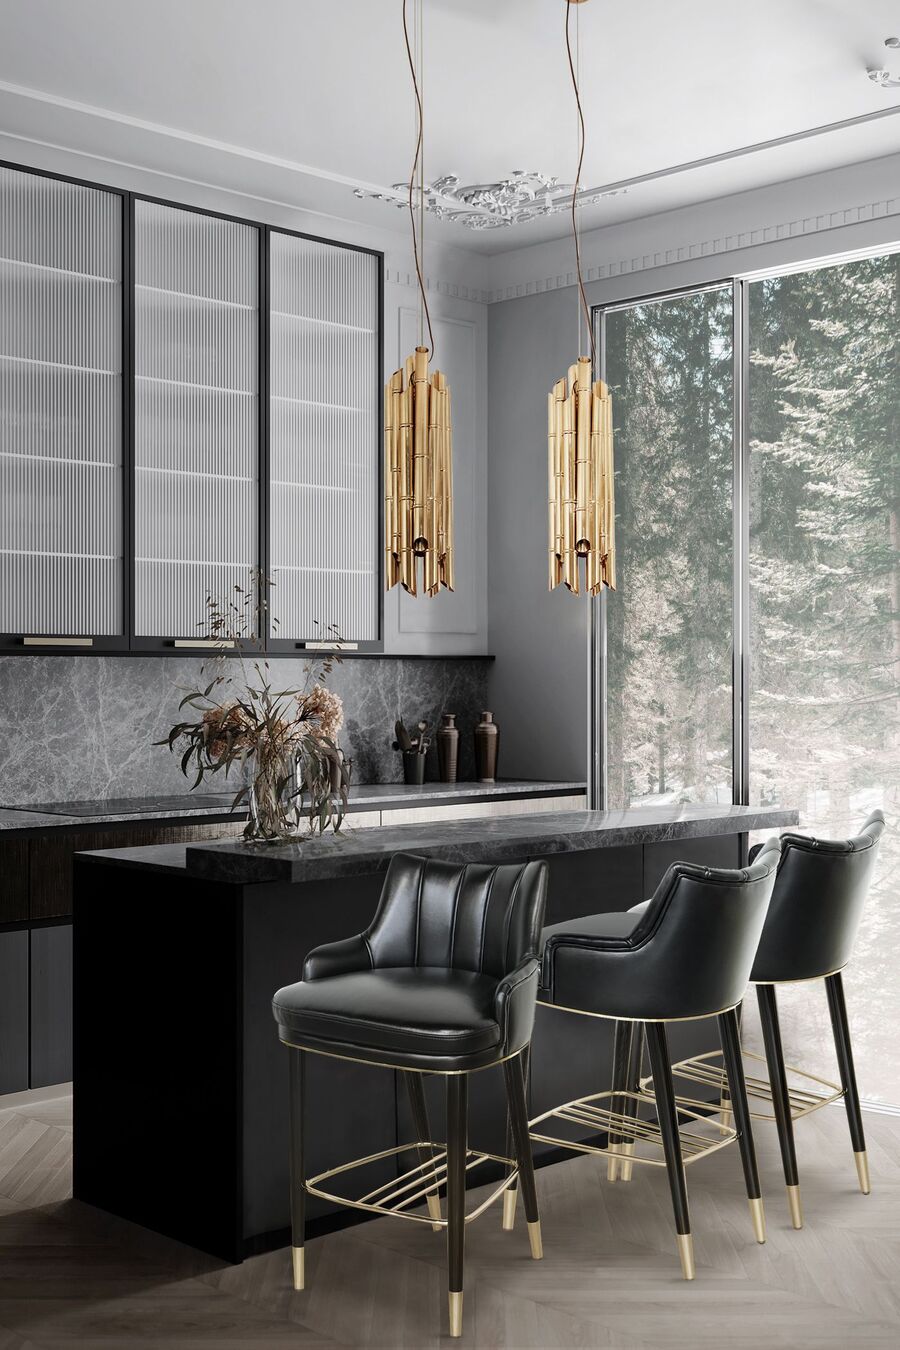 Modern kitchen design with black leather counter stools